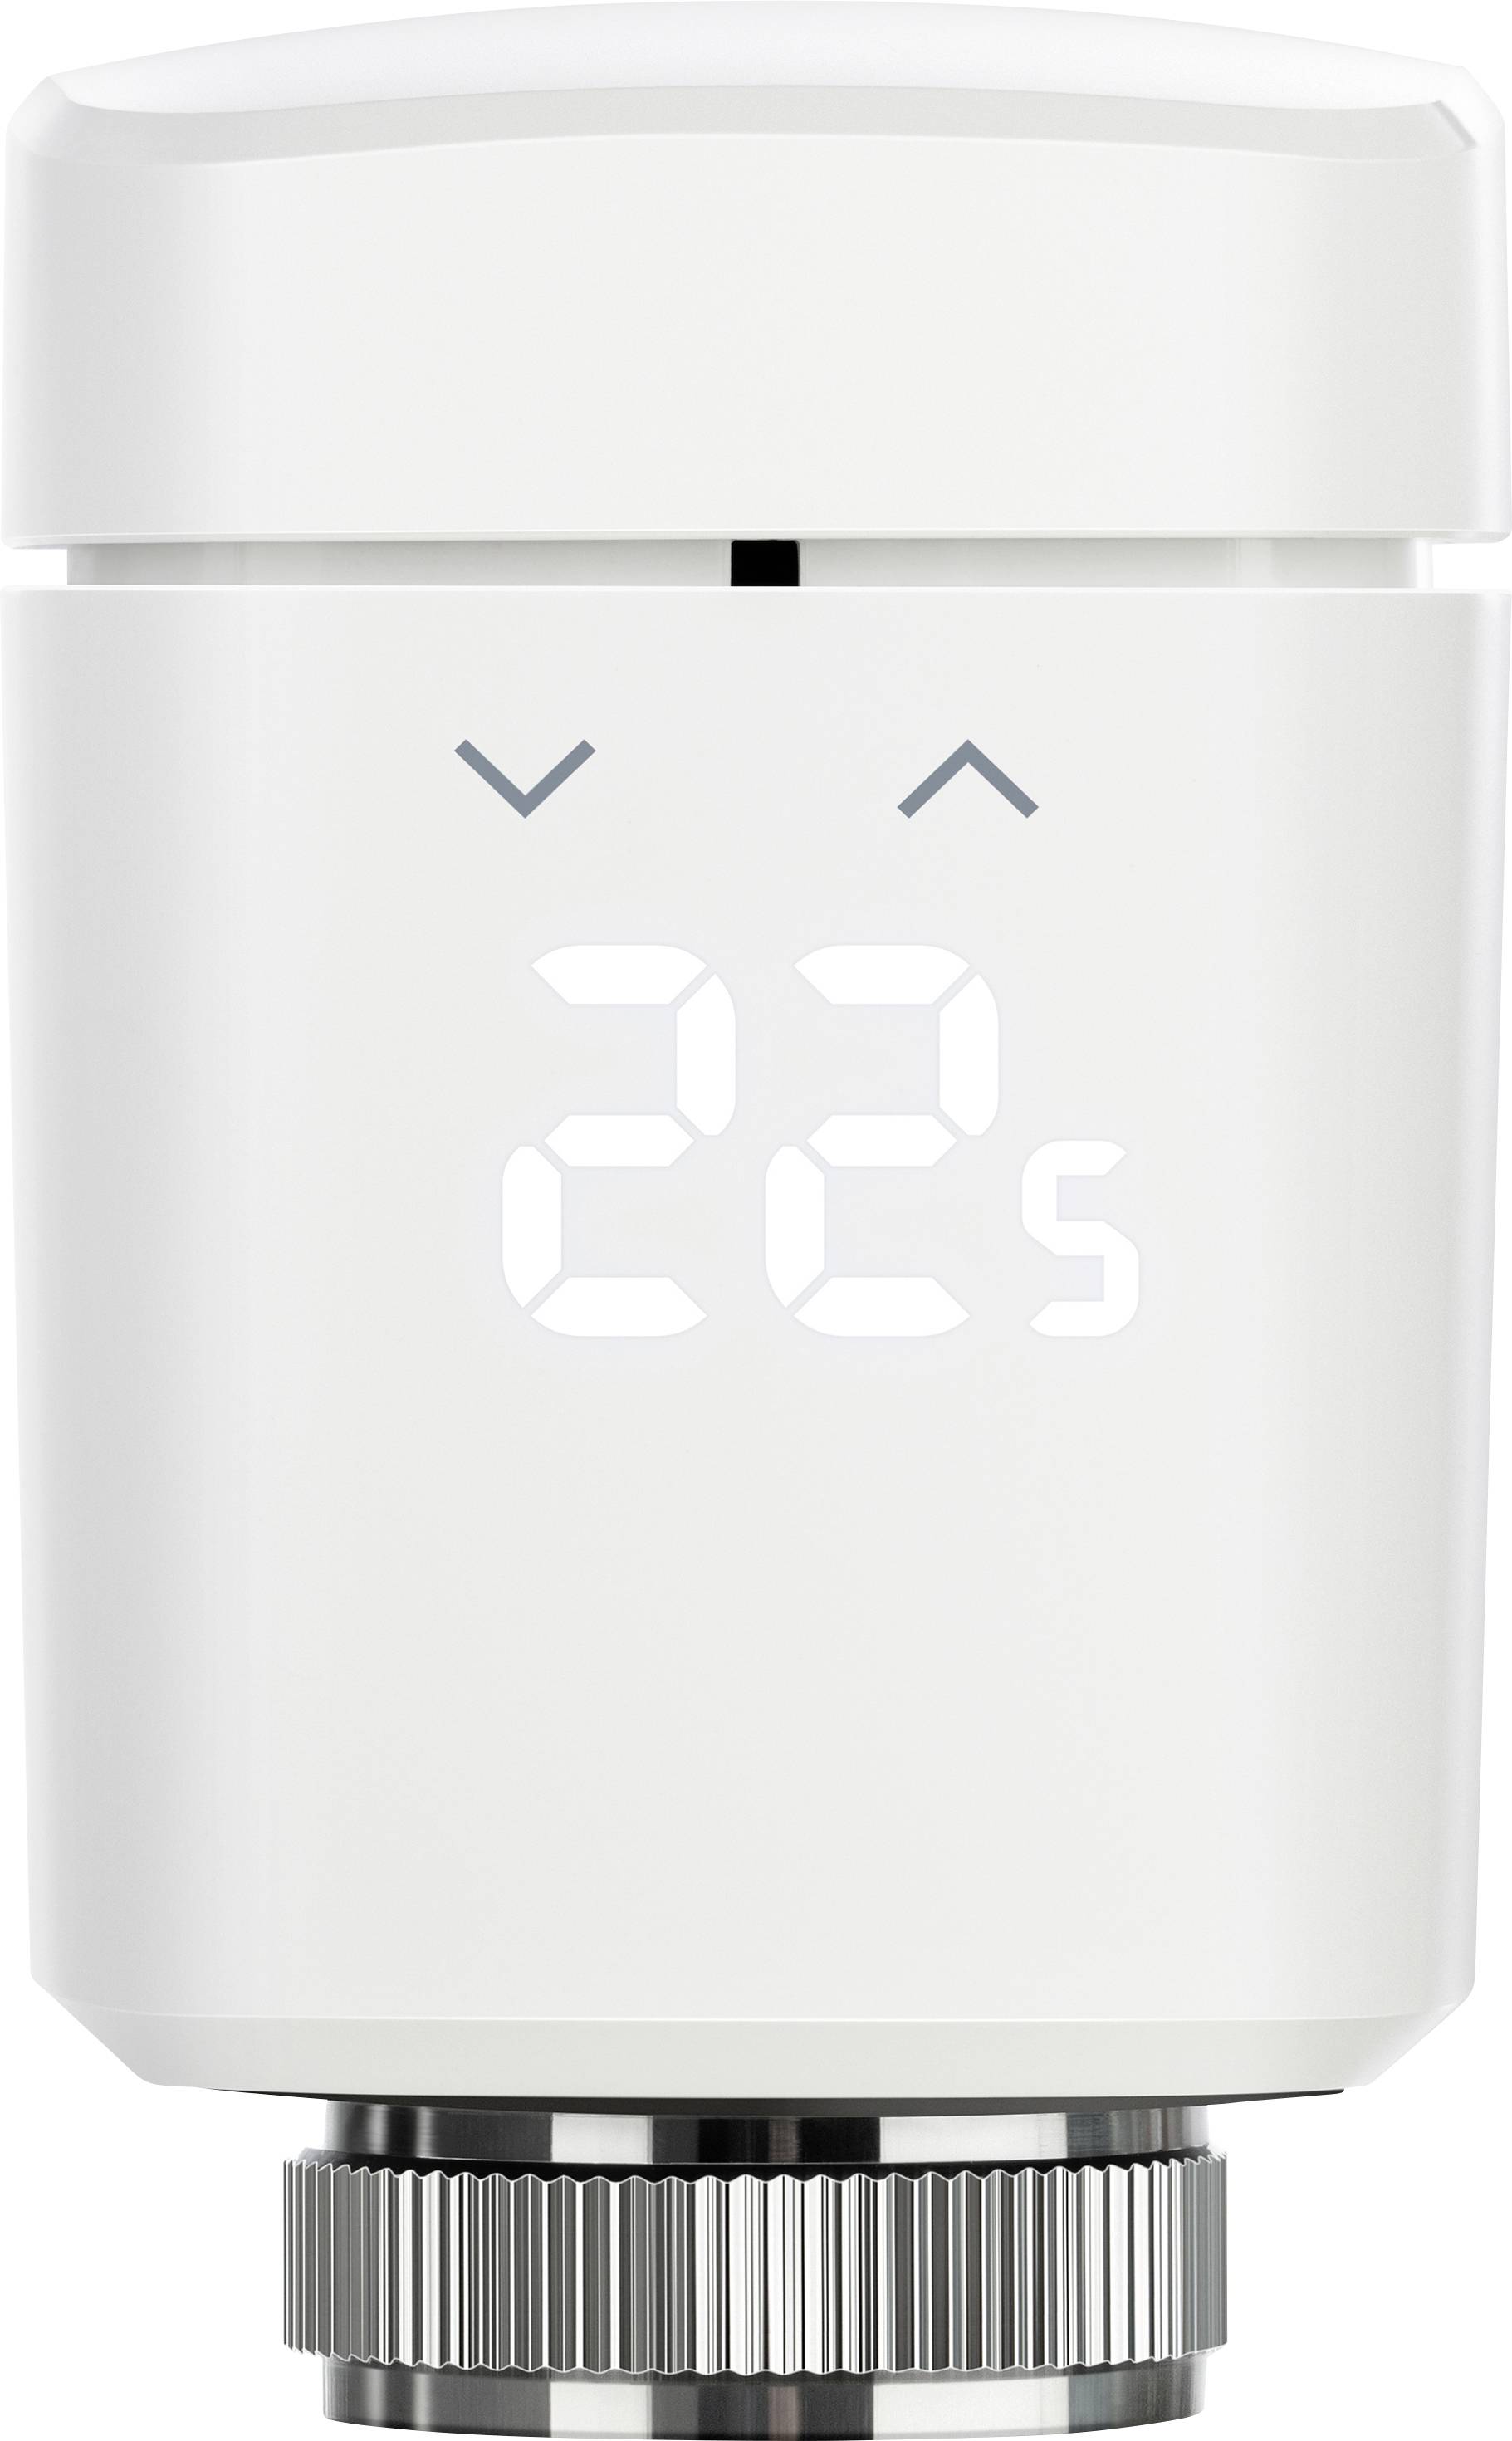 EVE SYSTEMS Thermo (Homekit)